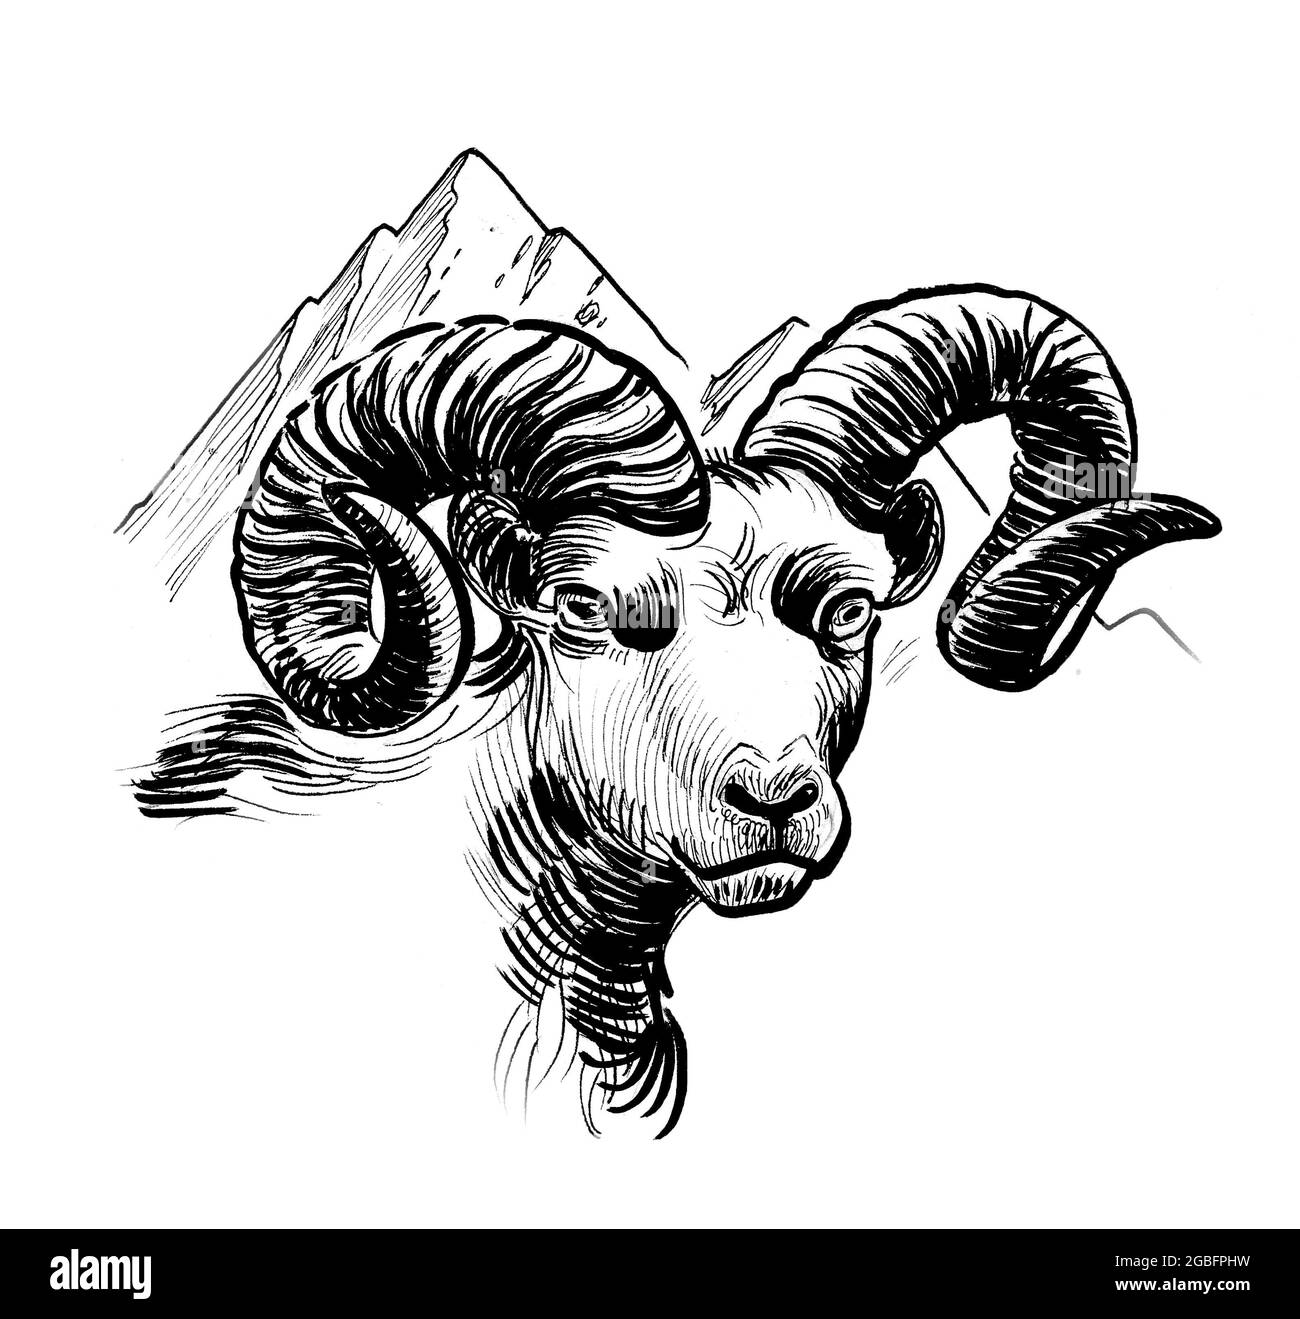 Ram head Black and White Stock Photos & Images - Alamy